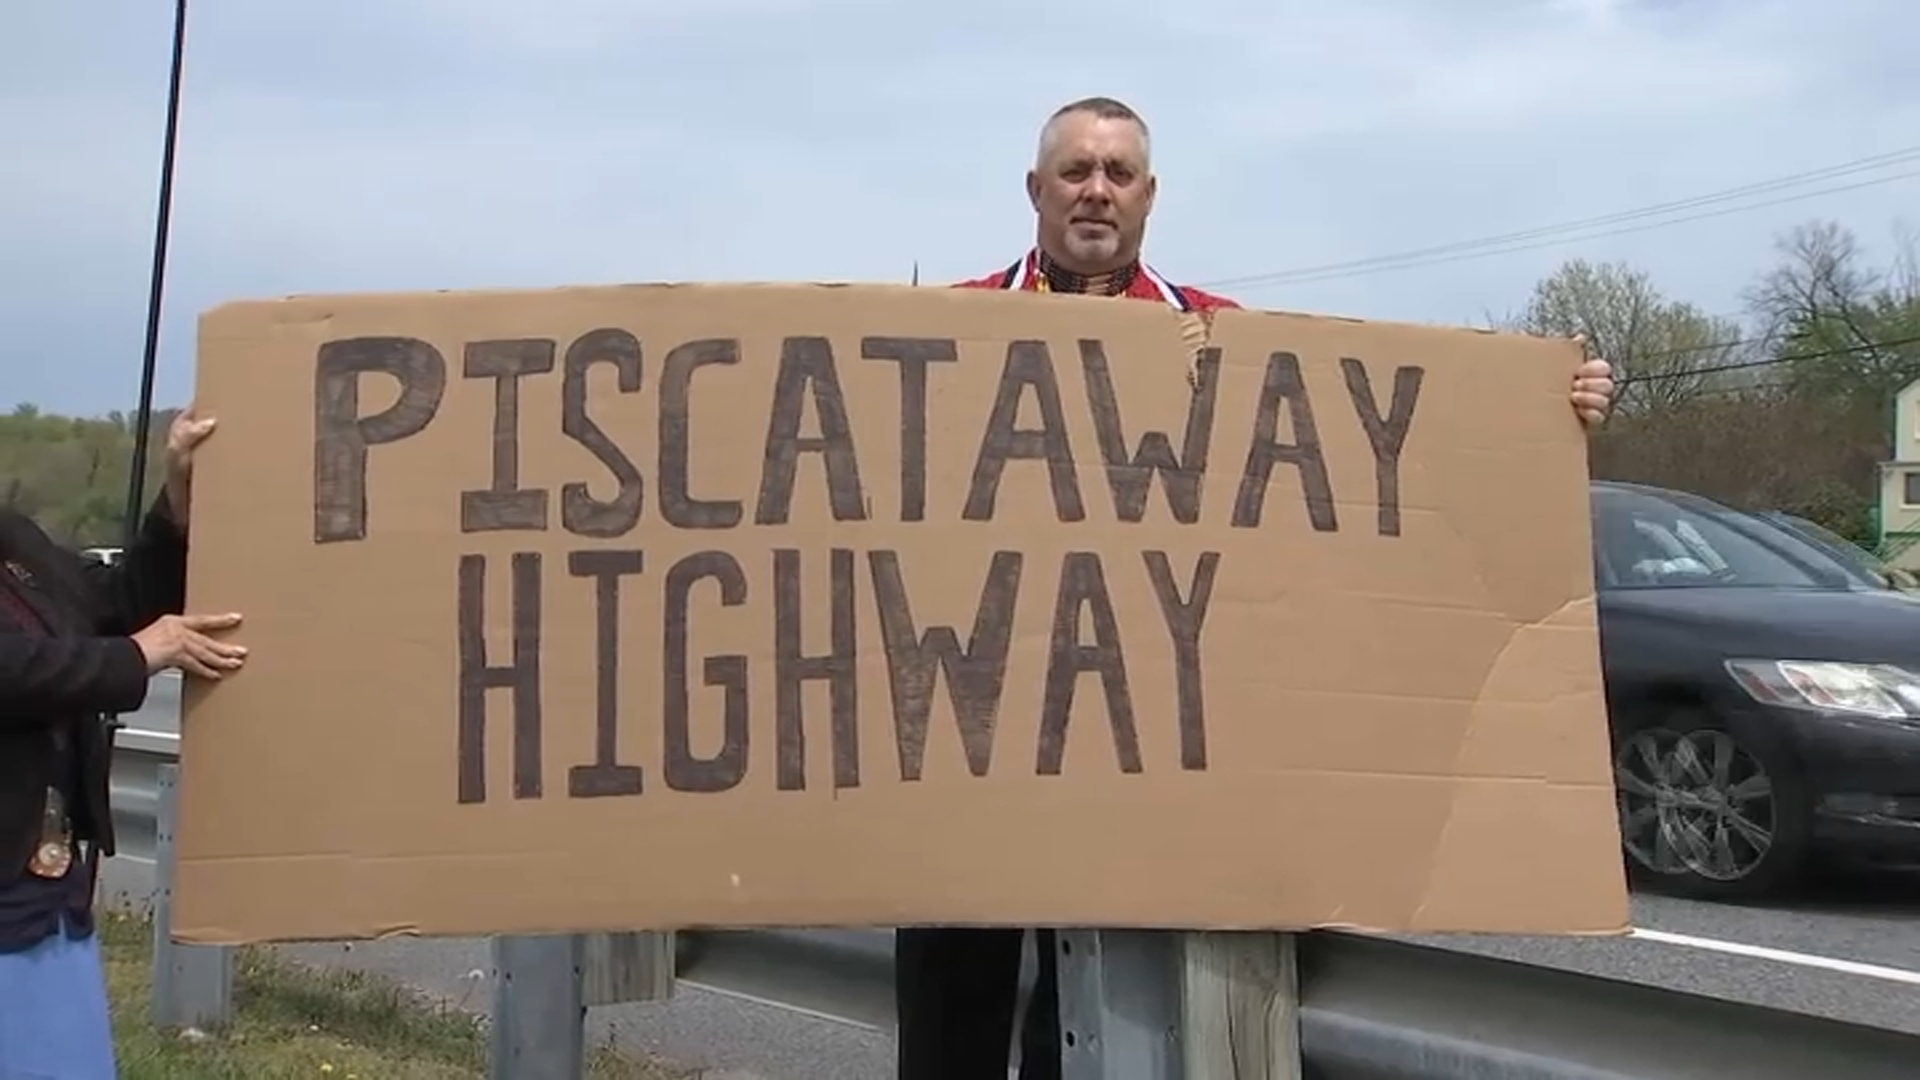 Maryland Route 210 Not Changing to Piscataway Highway – NBC4 Washington